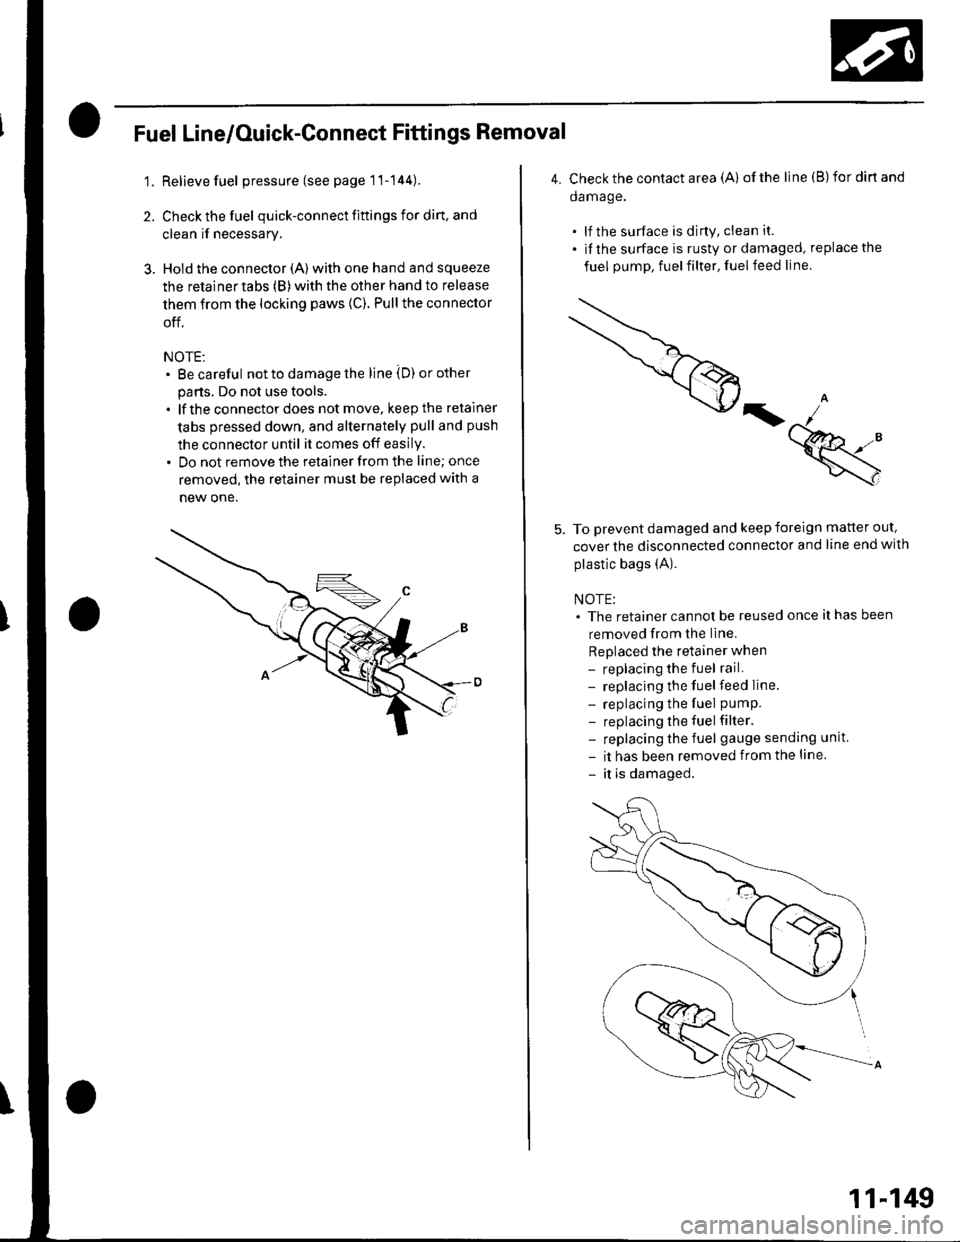 HONDA CIVIC 2003 7.G Workshop Manual 2.
Fuel Line/Ouick-Gonnect Fittings Removal
1. Relieve fuel pressure (see page 1l-144).
Check the fuel quick-connect fiftings for din, and
clean if necessary.
Hold the connector (A) with one hand and